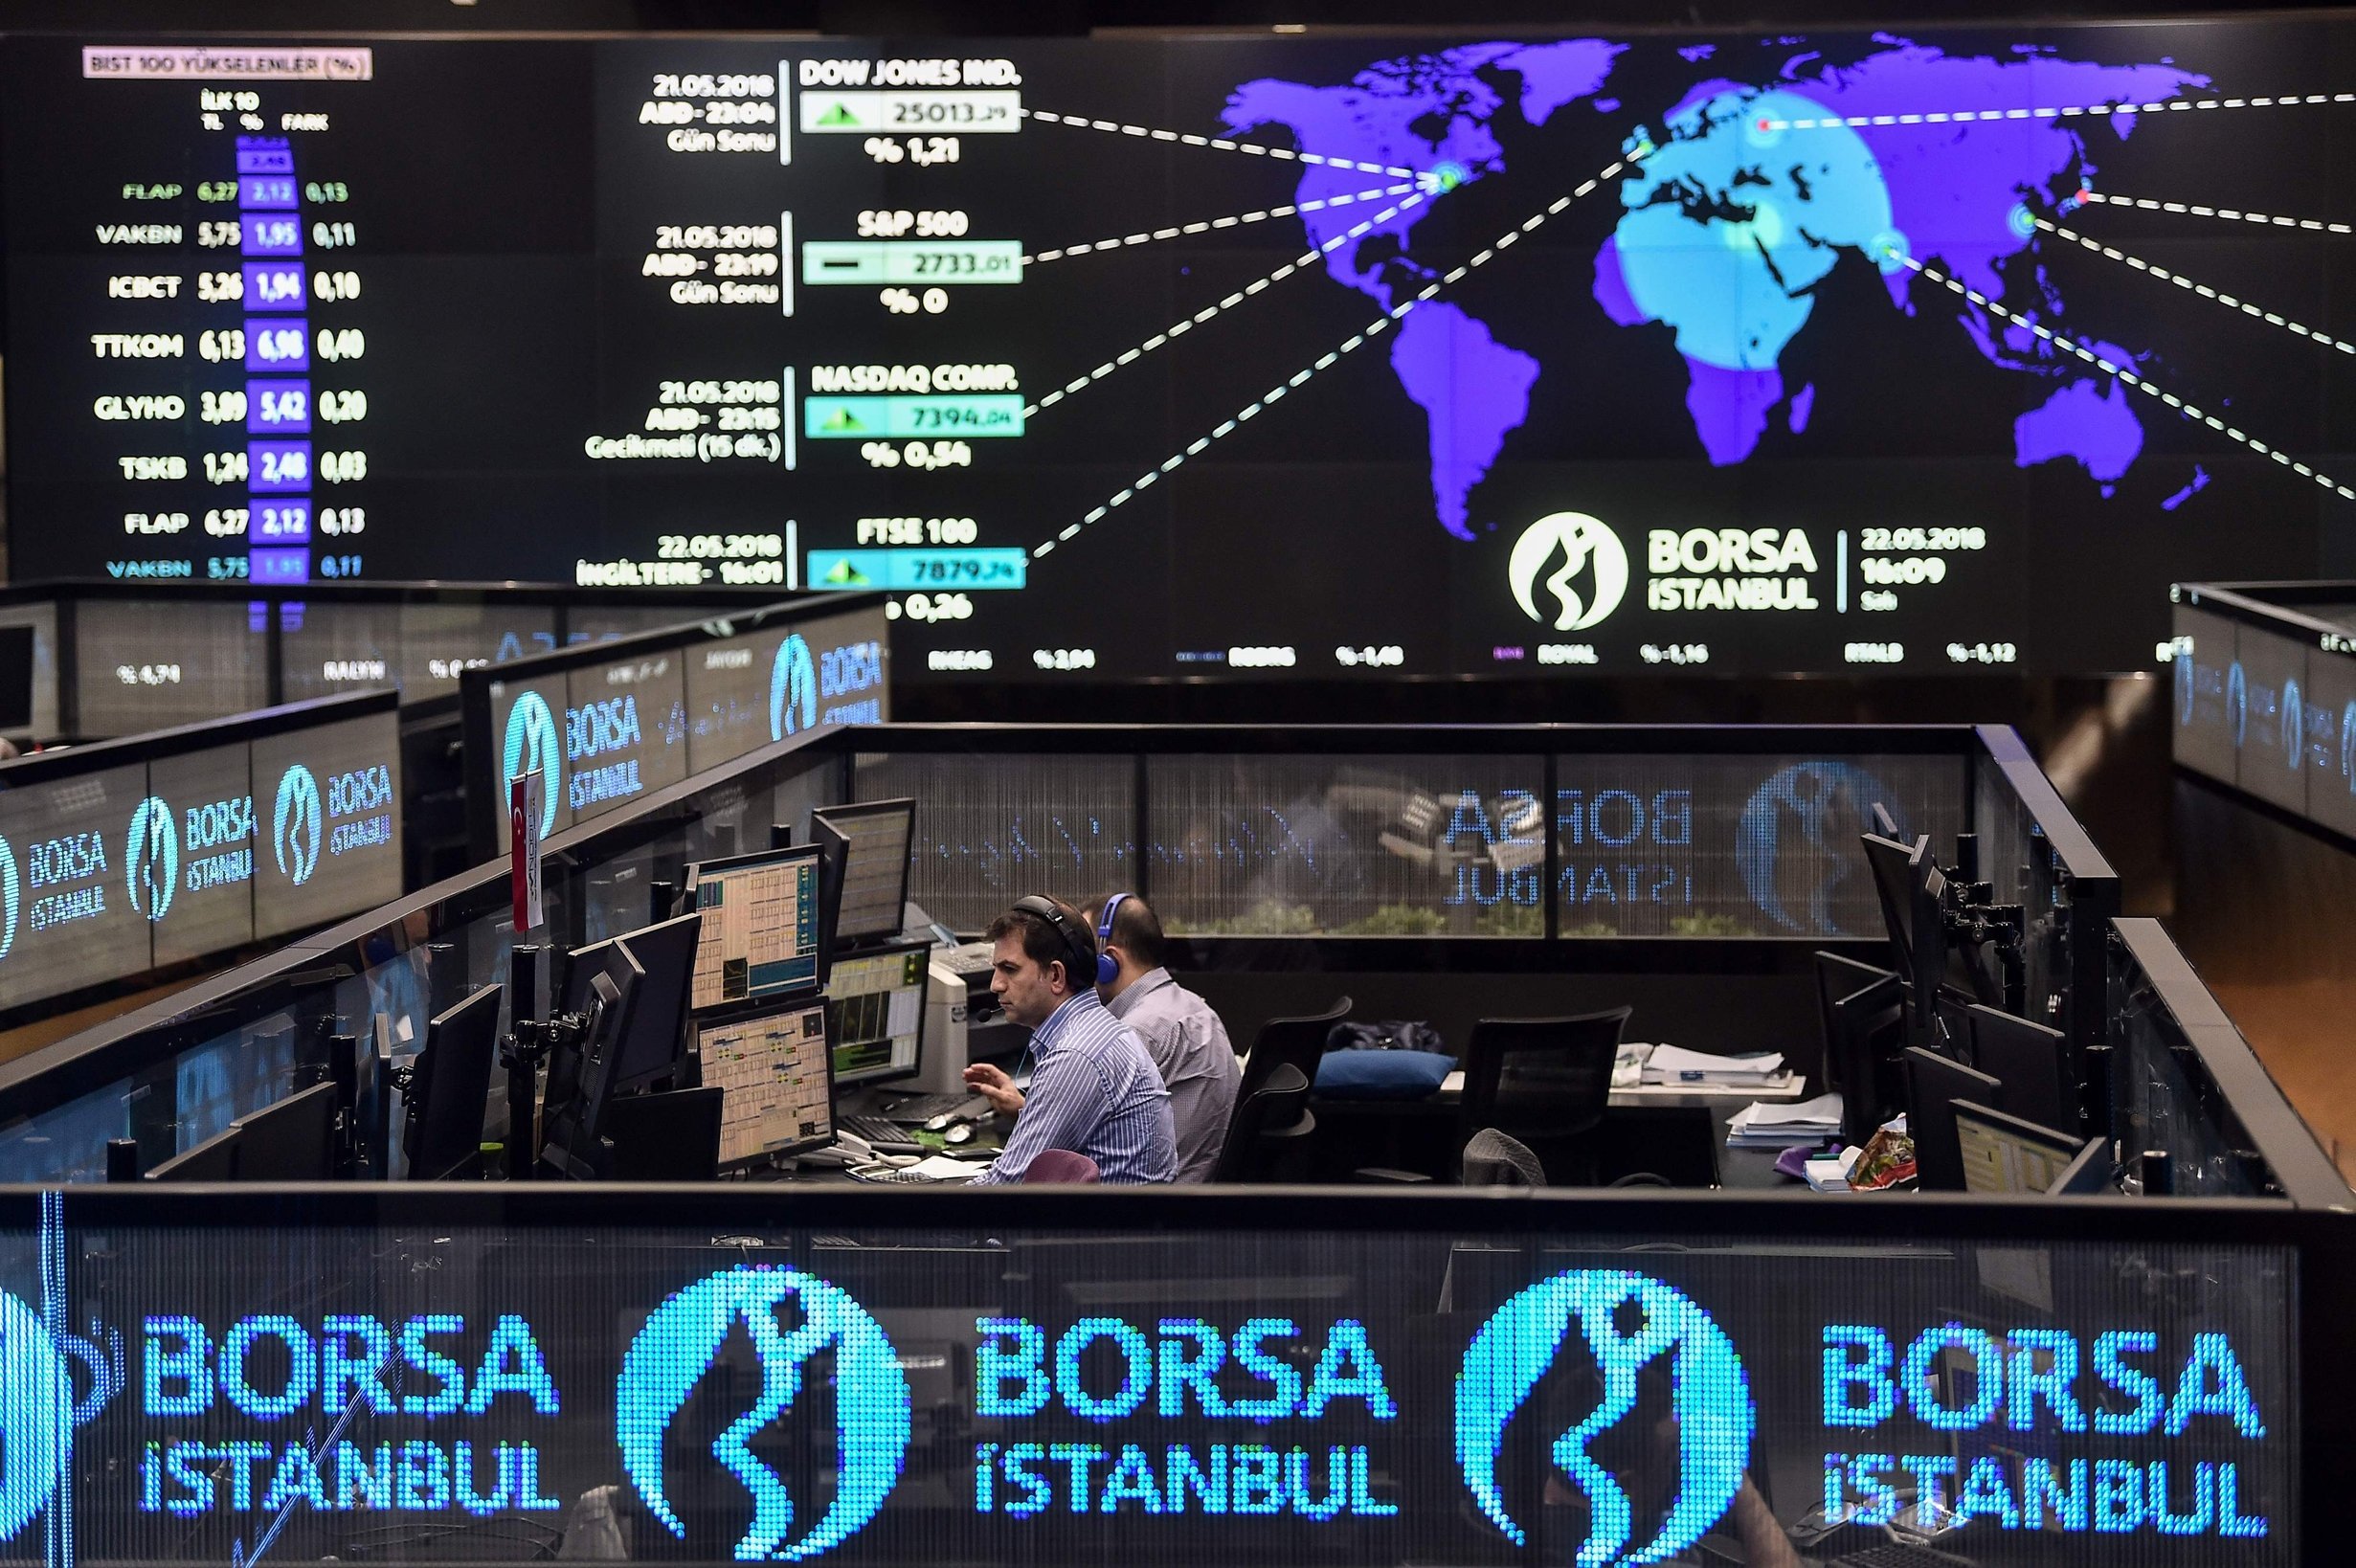 Qatari Investment Body To Acquire 10 Share In Borsa Istanbul Daily Sabah